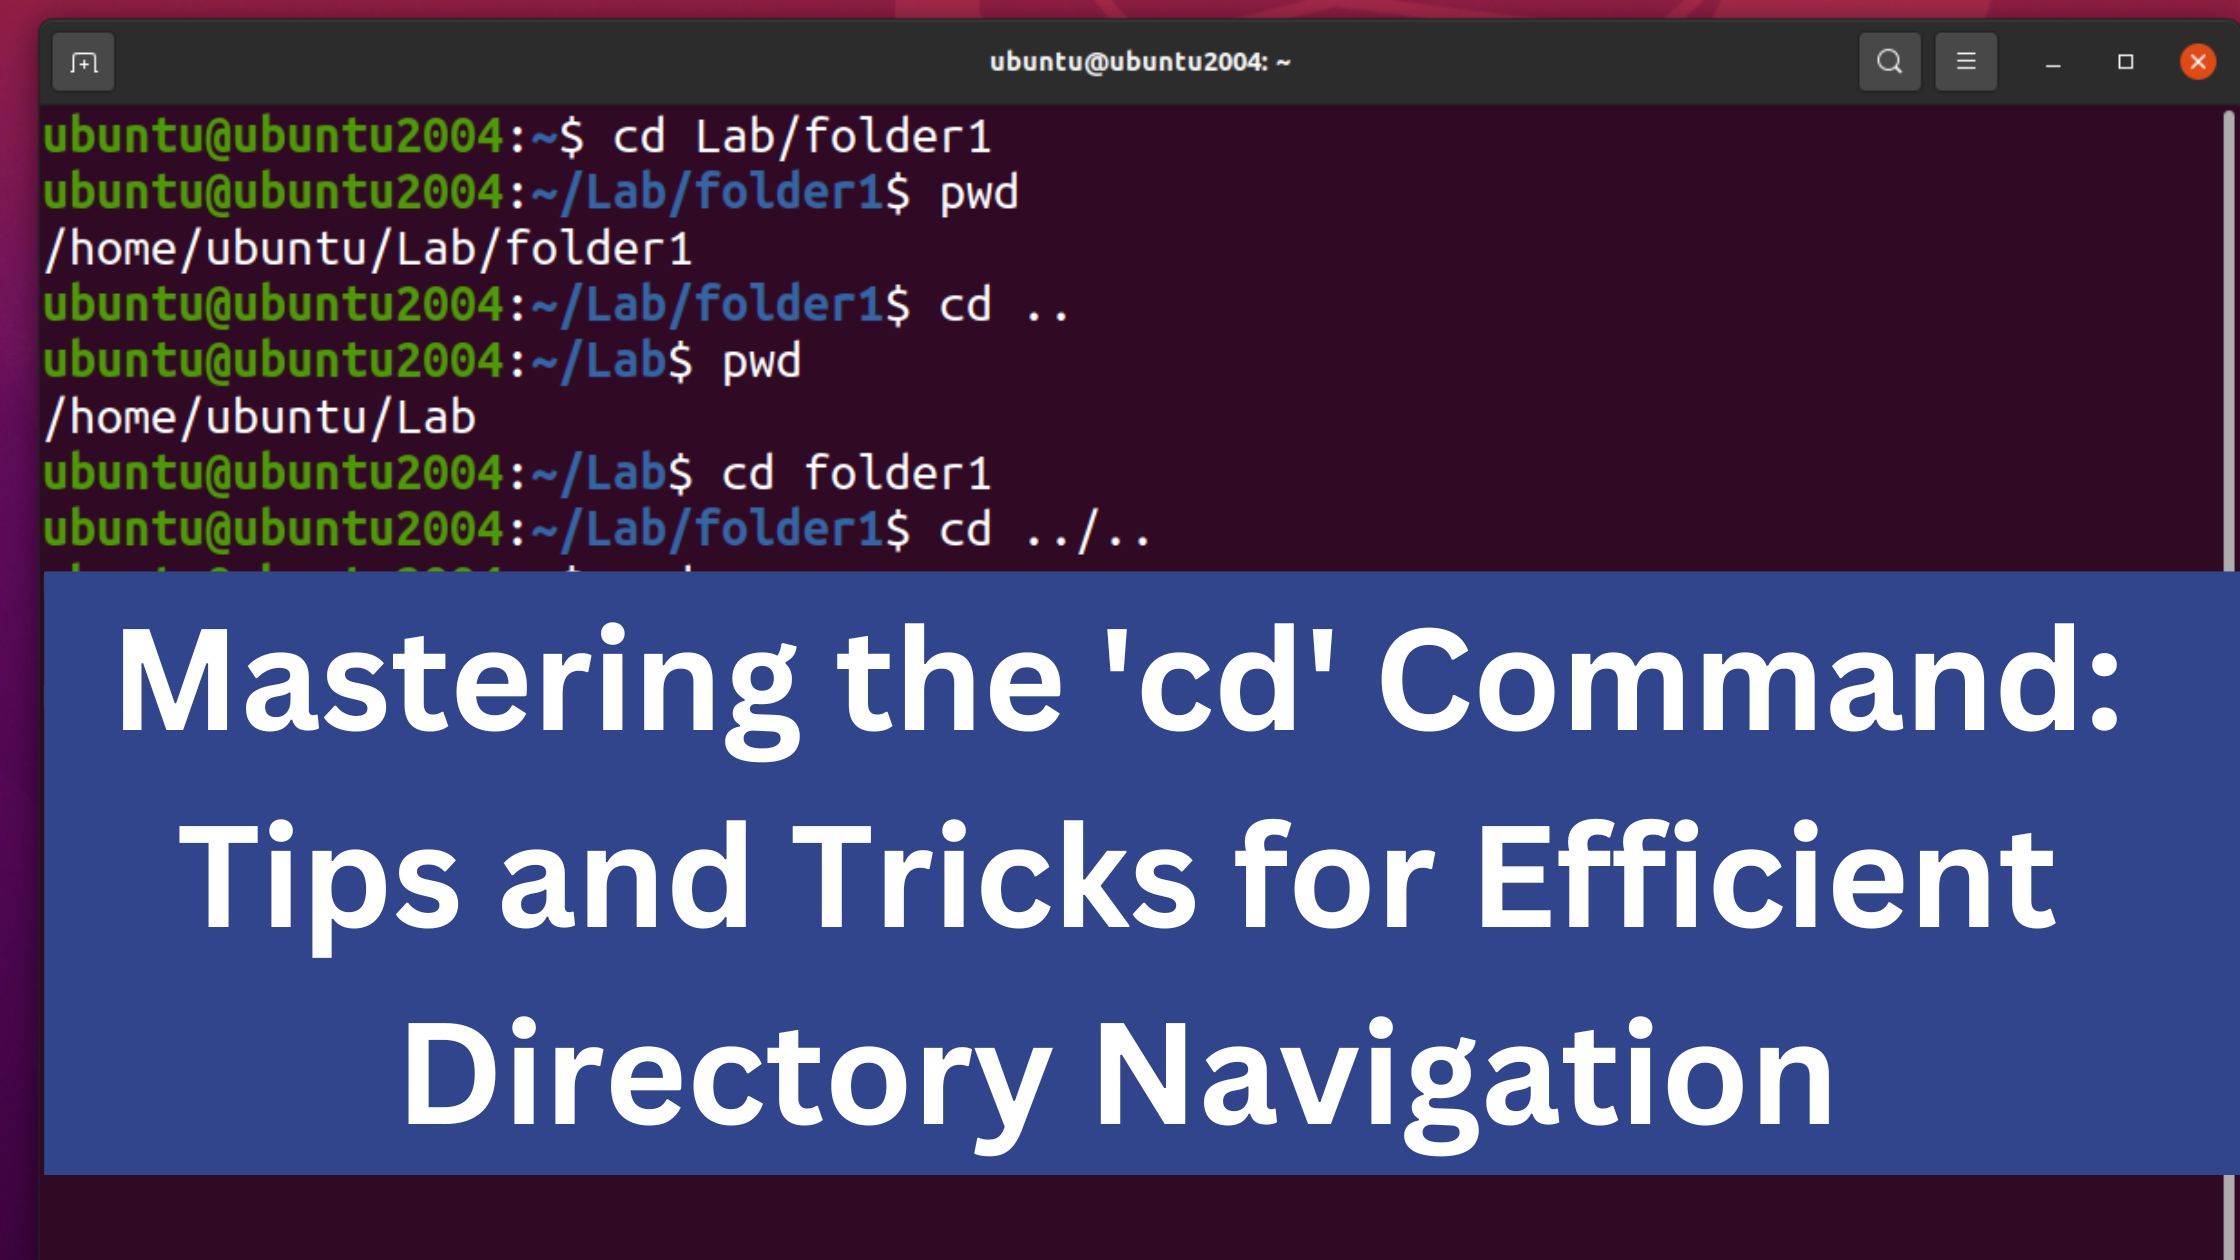 Mastering the 'cd' Command Tips and Tricks for Efficient Directory Navigation